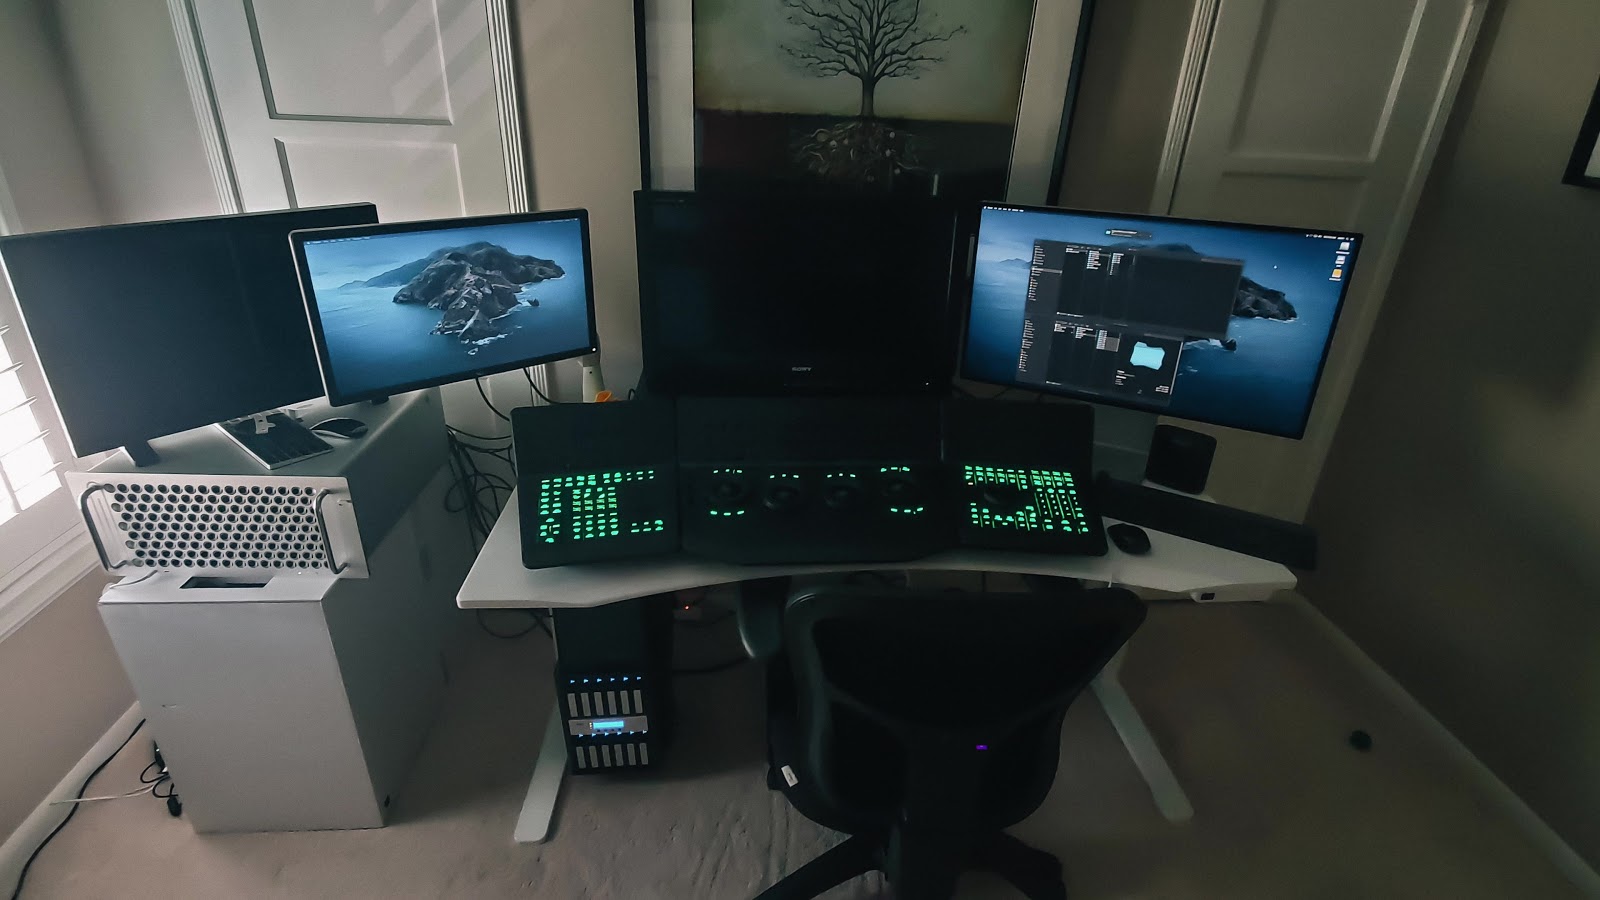 Full Baselight system set up in home office.